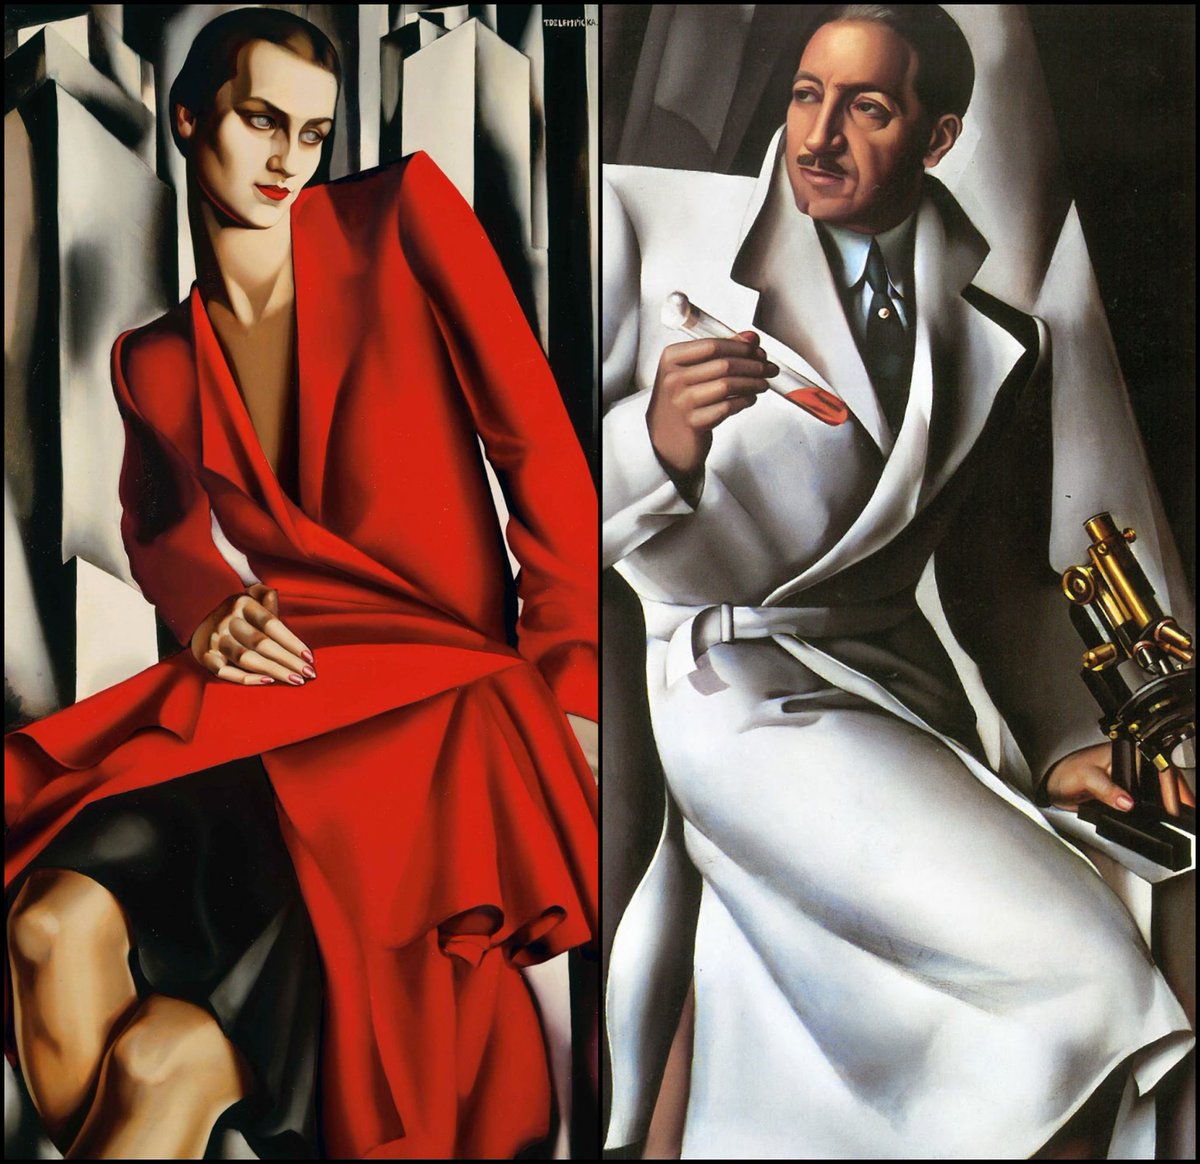 126 years ago today the most stylish painter in history was born. She was called Tamara de Lempicka and everything about her life and art embodied the spirit of the 1920s. If you like Art Deco, you'll love Tamara de Lempicka...